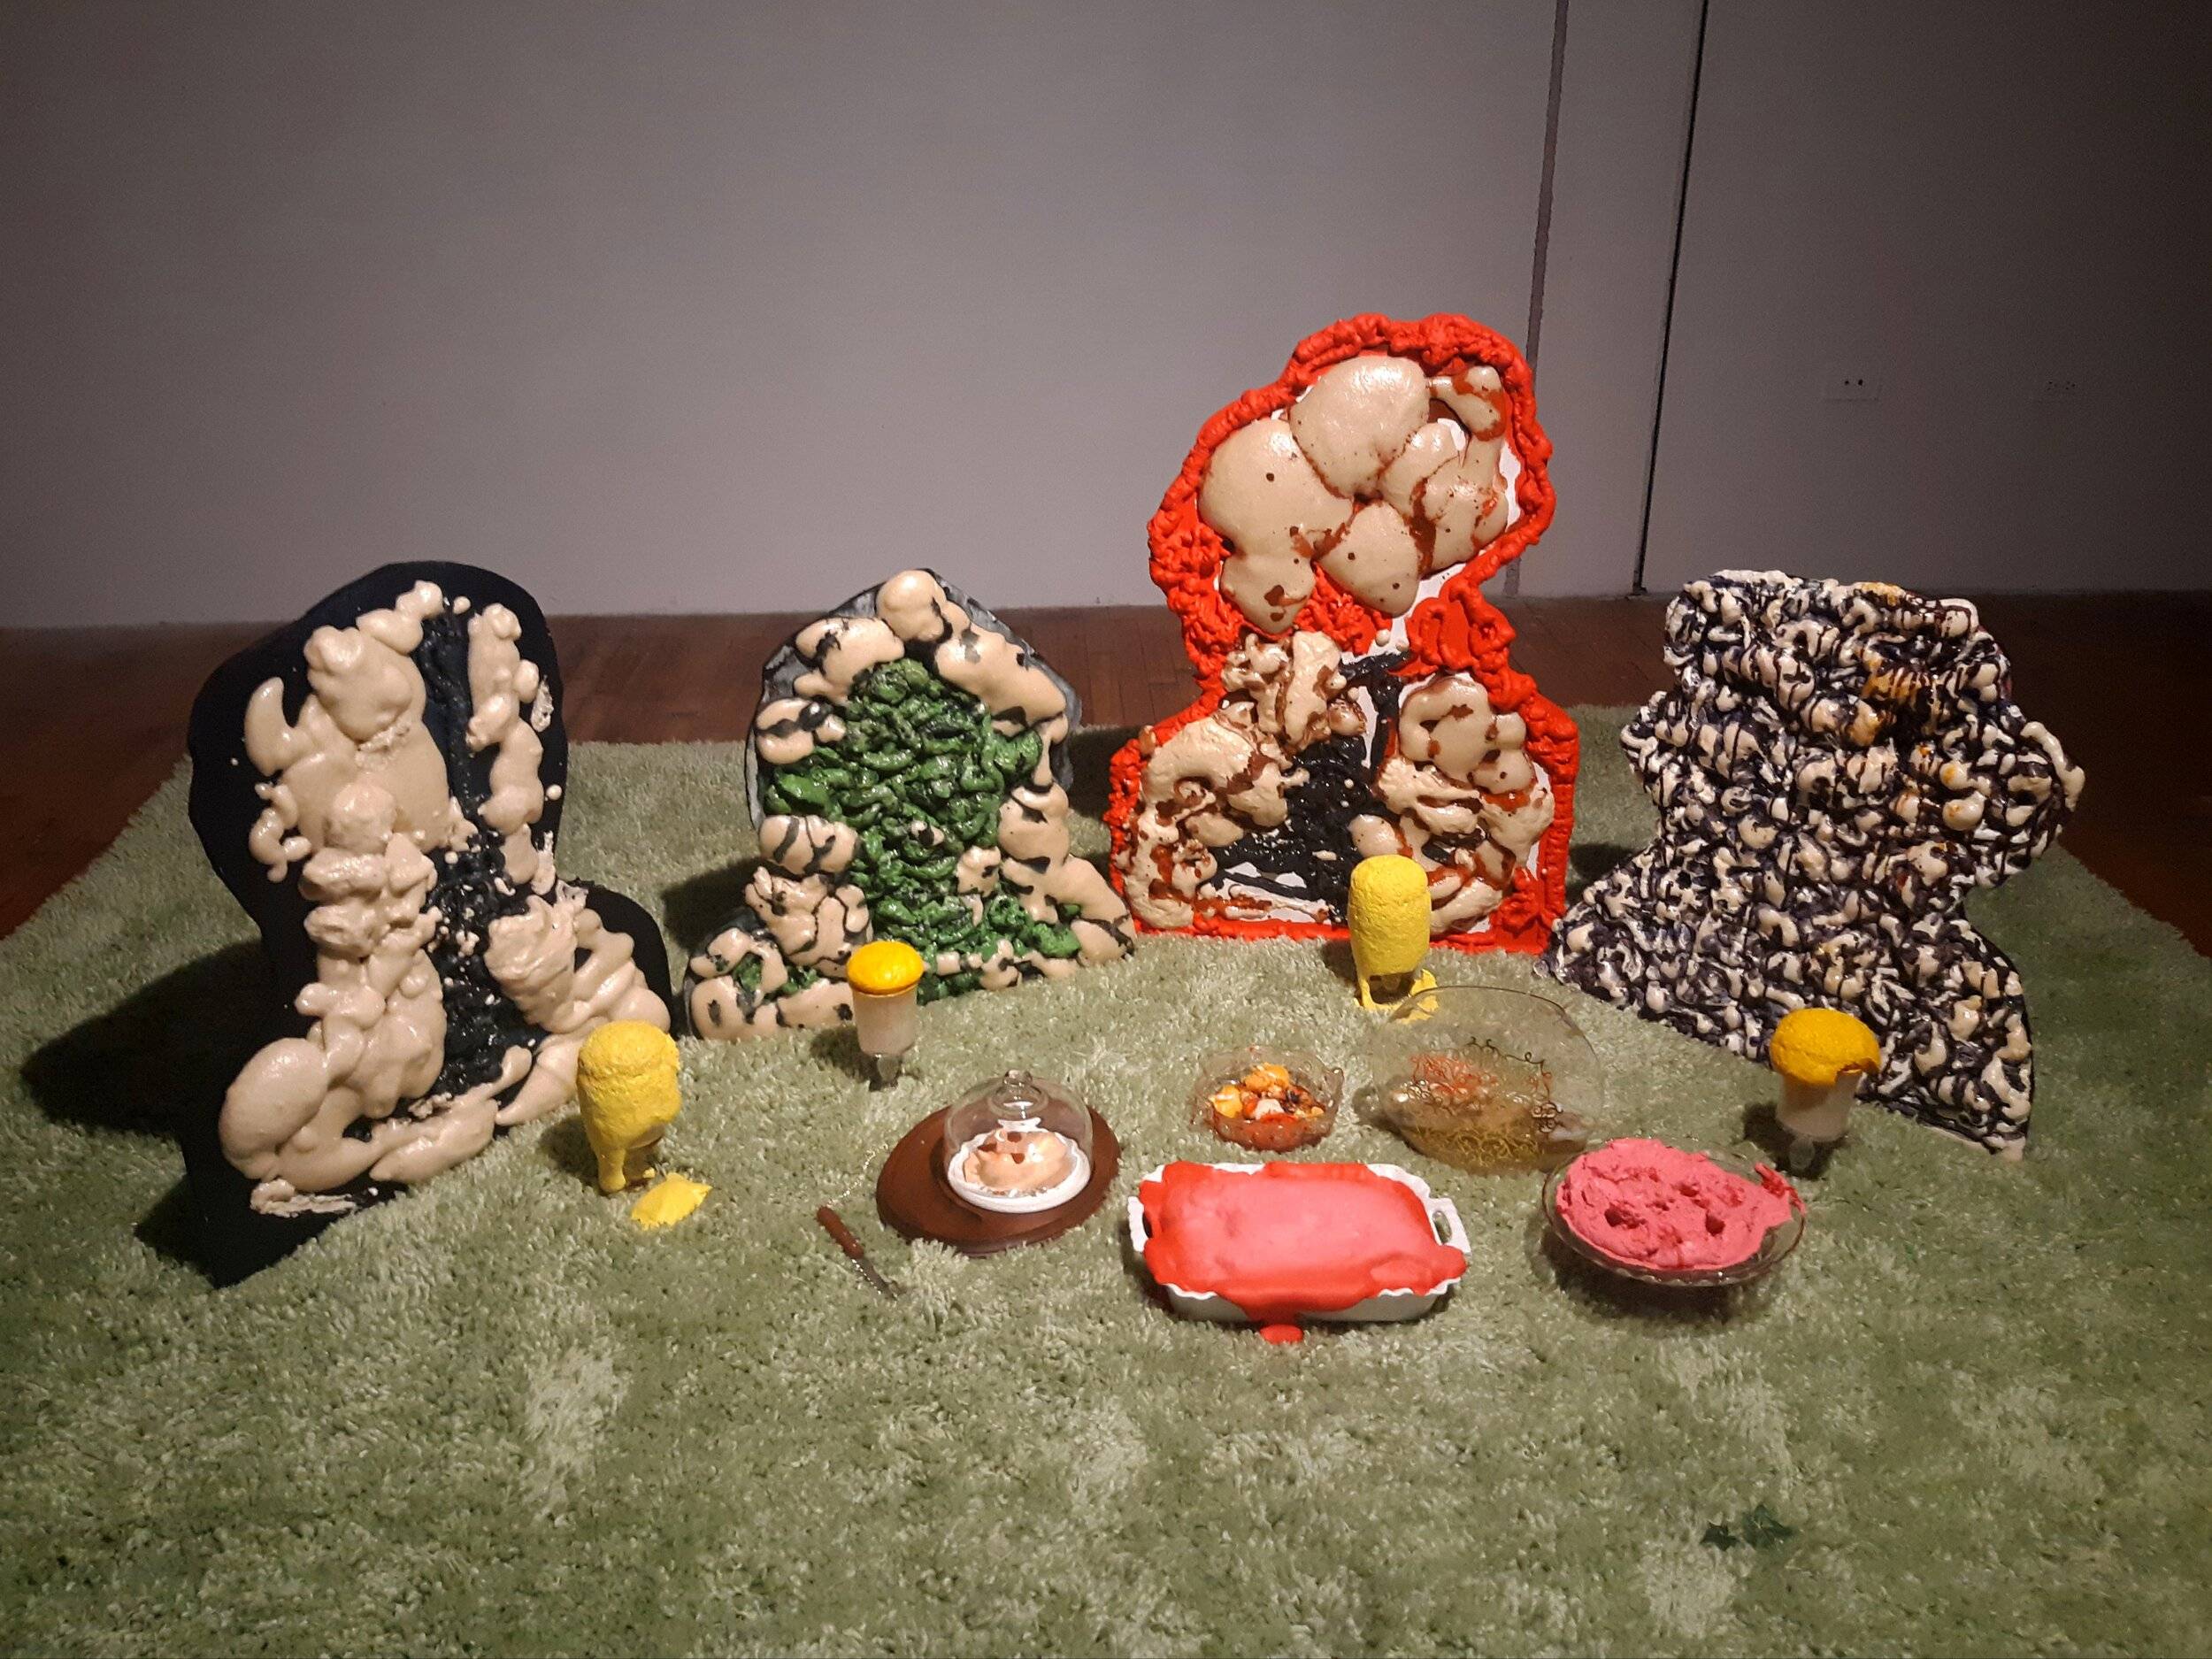 Four lumpy figures sit around an array of abstract drink glasses and foods.